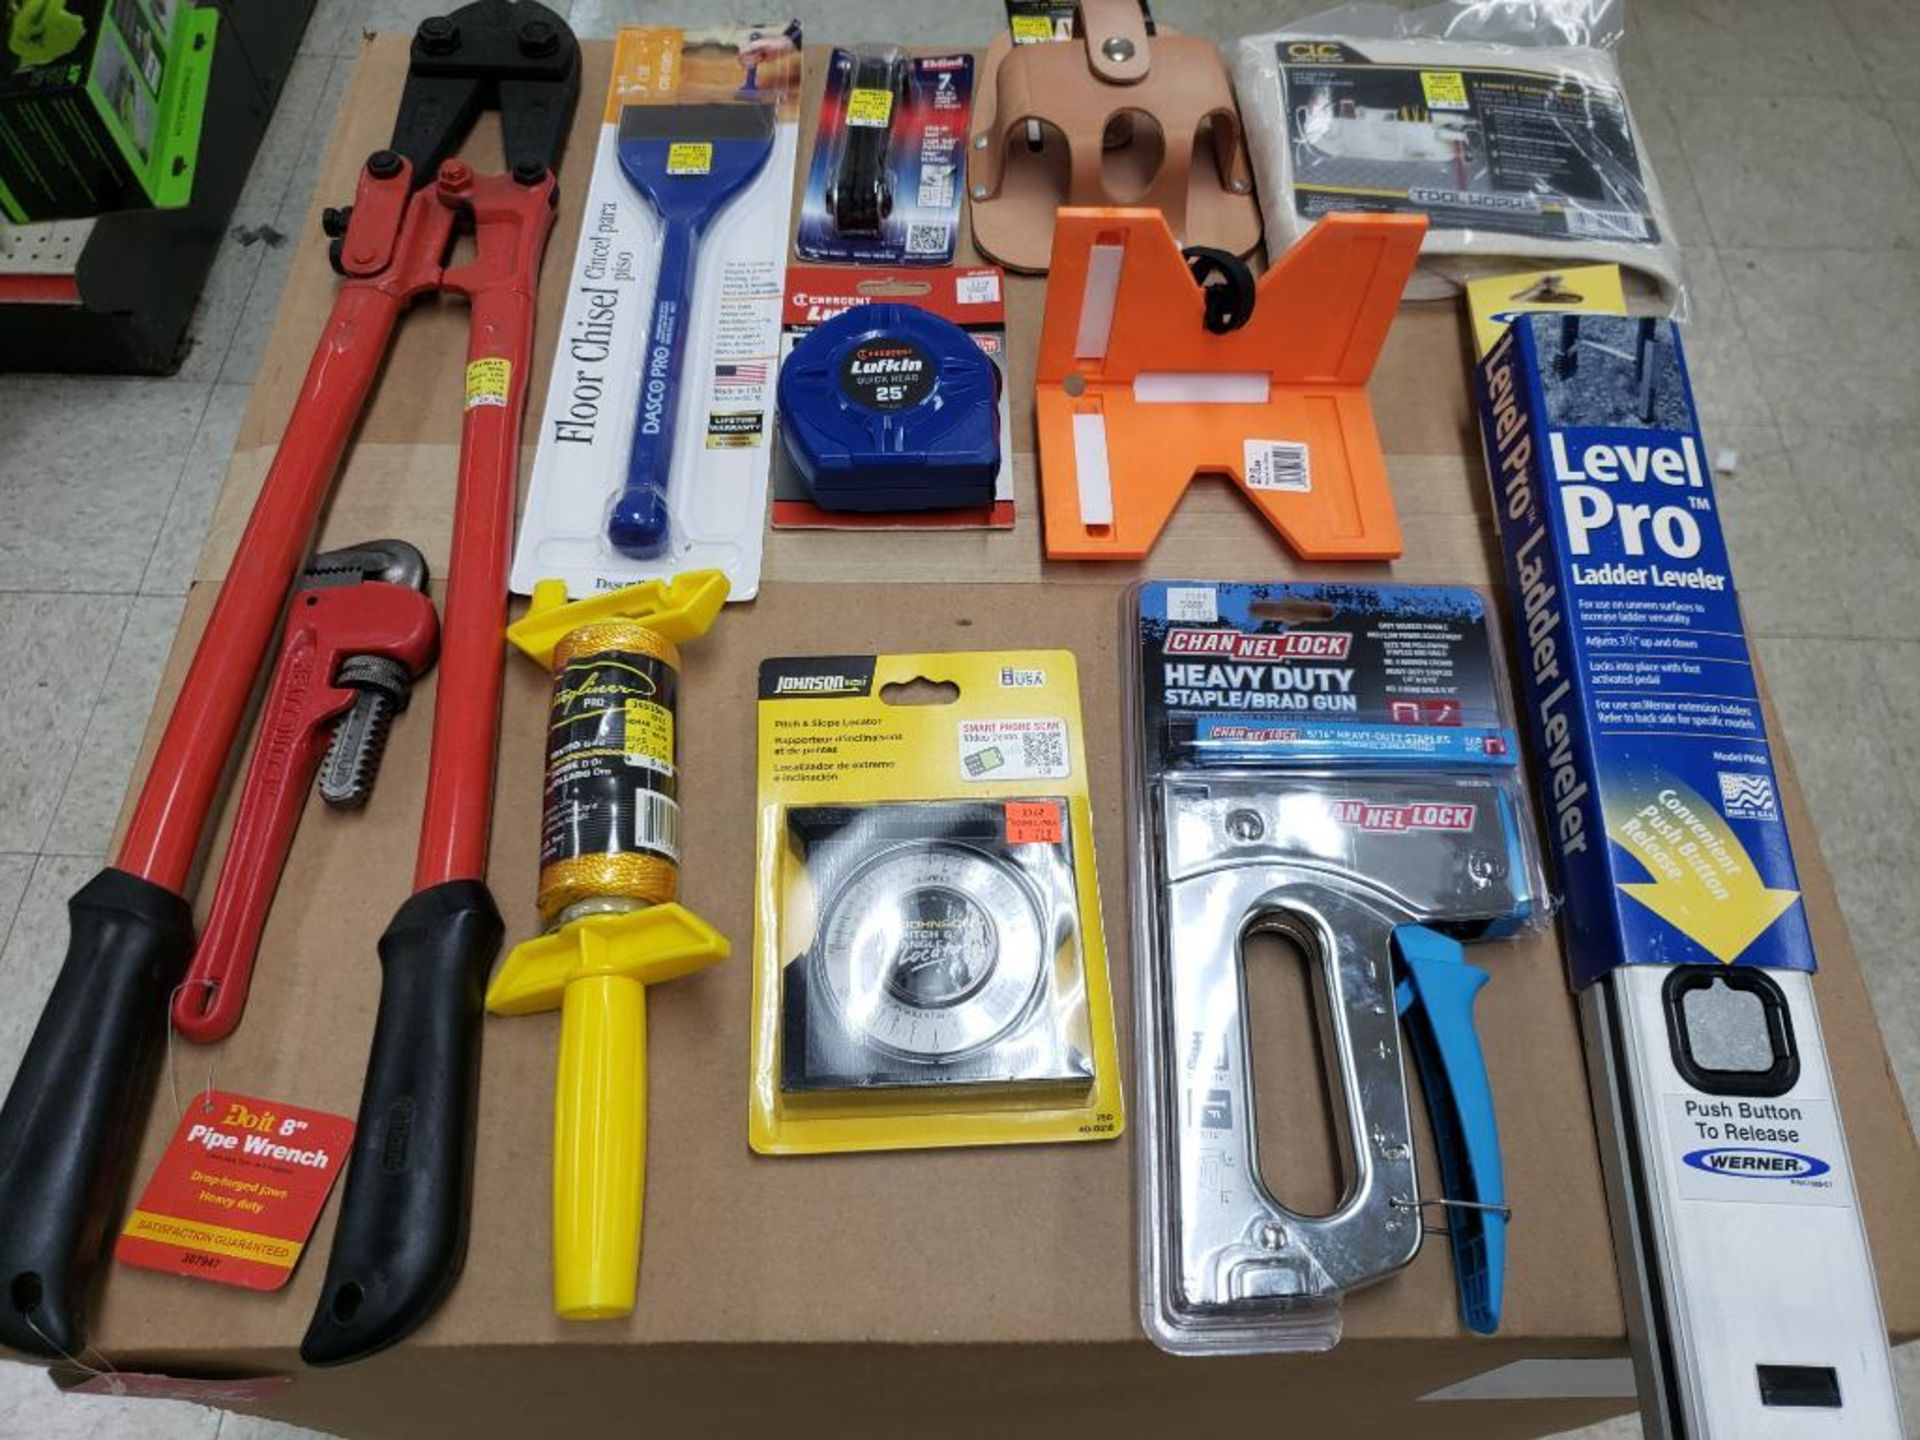 Large assortment of tools. New as pictured.